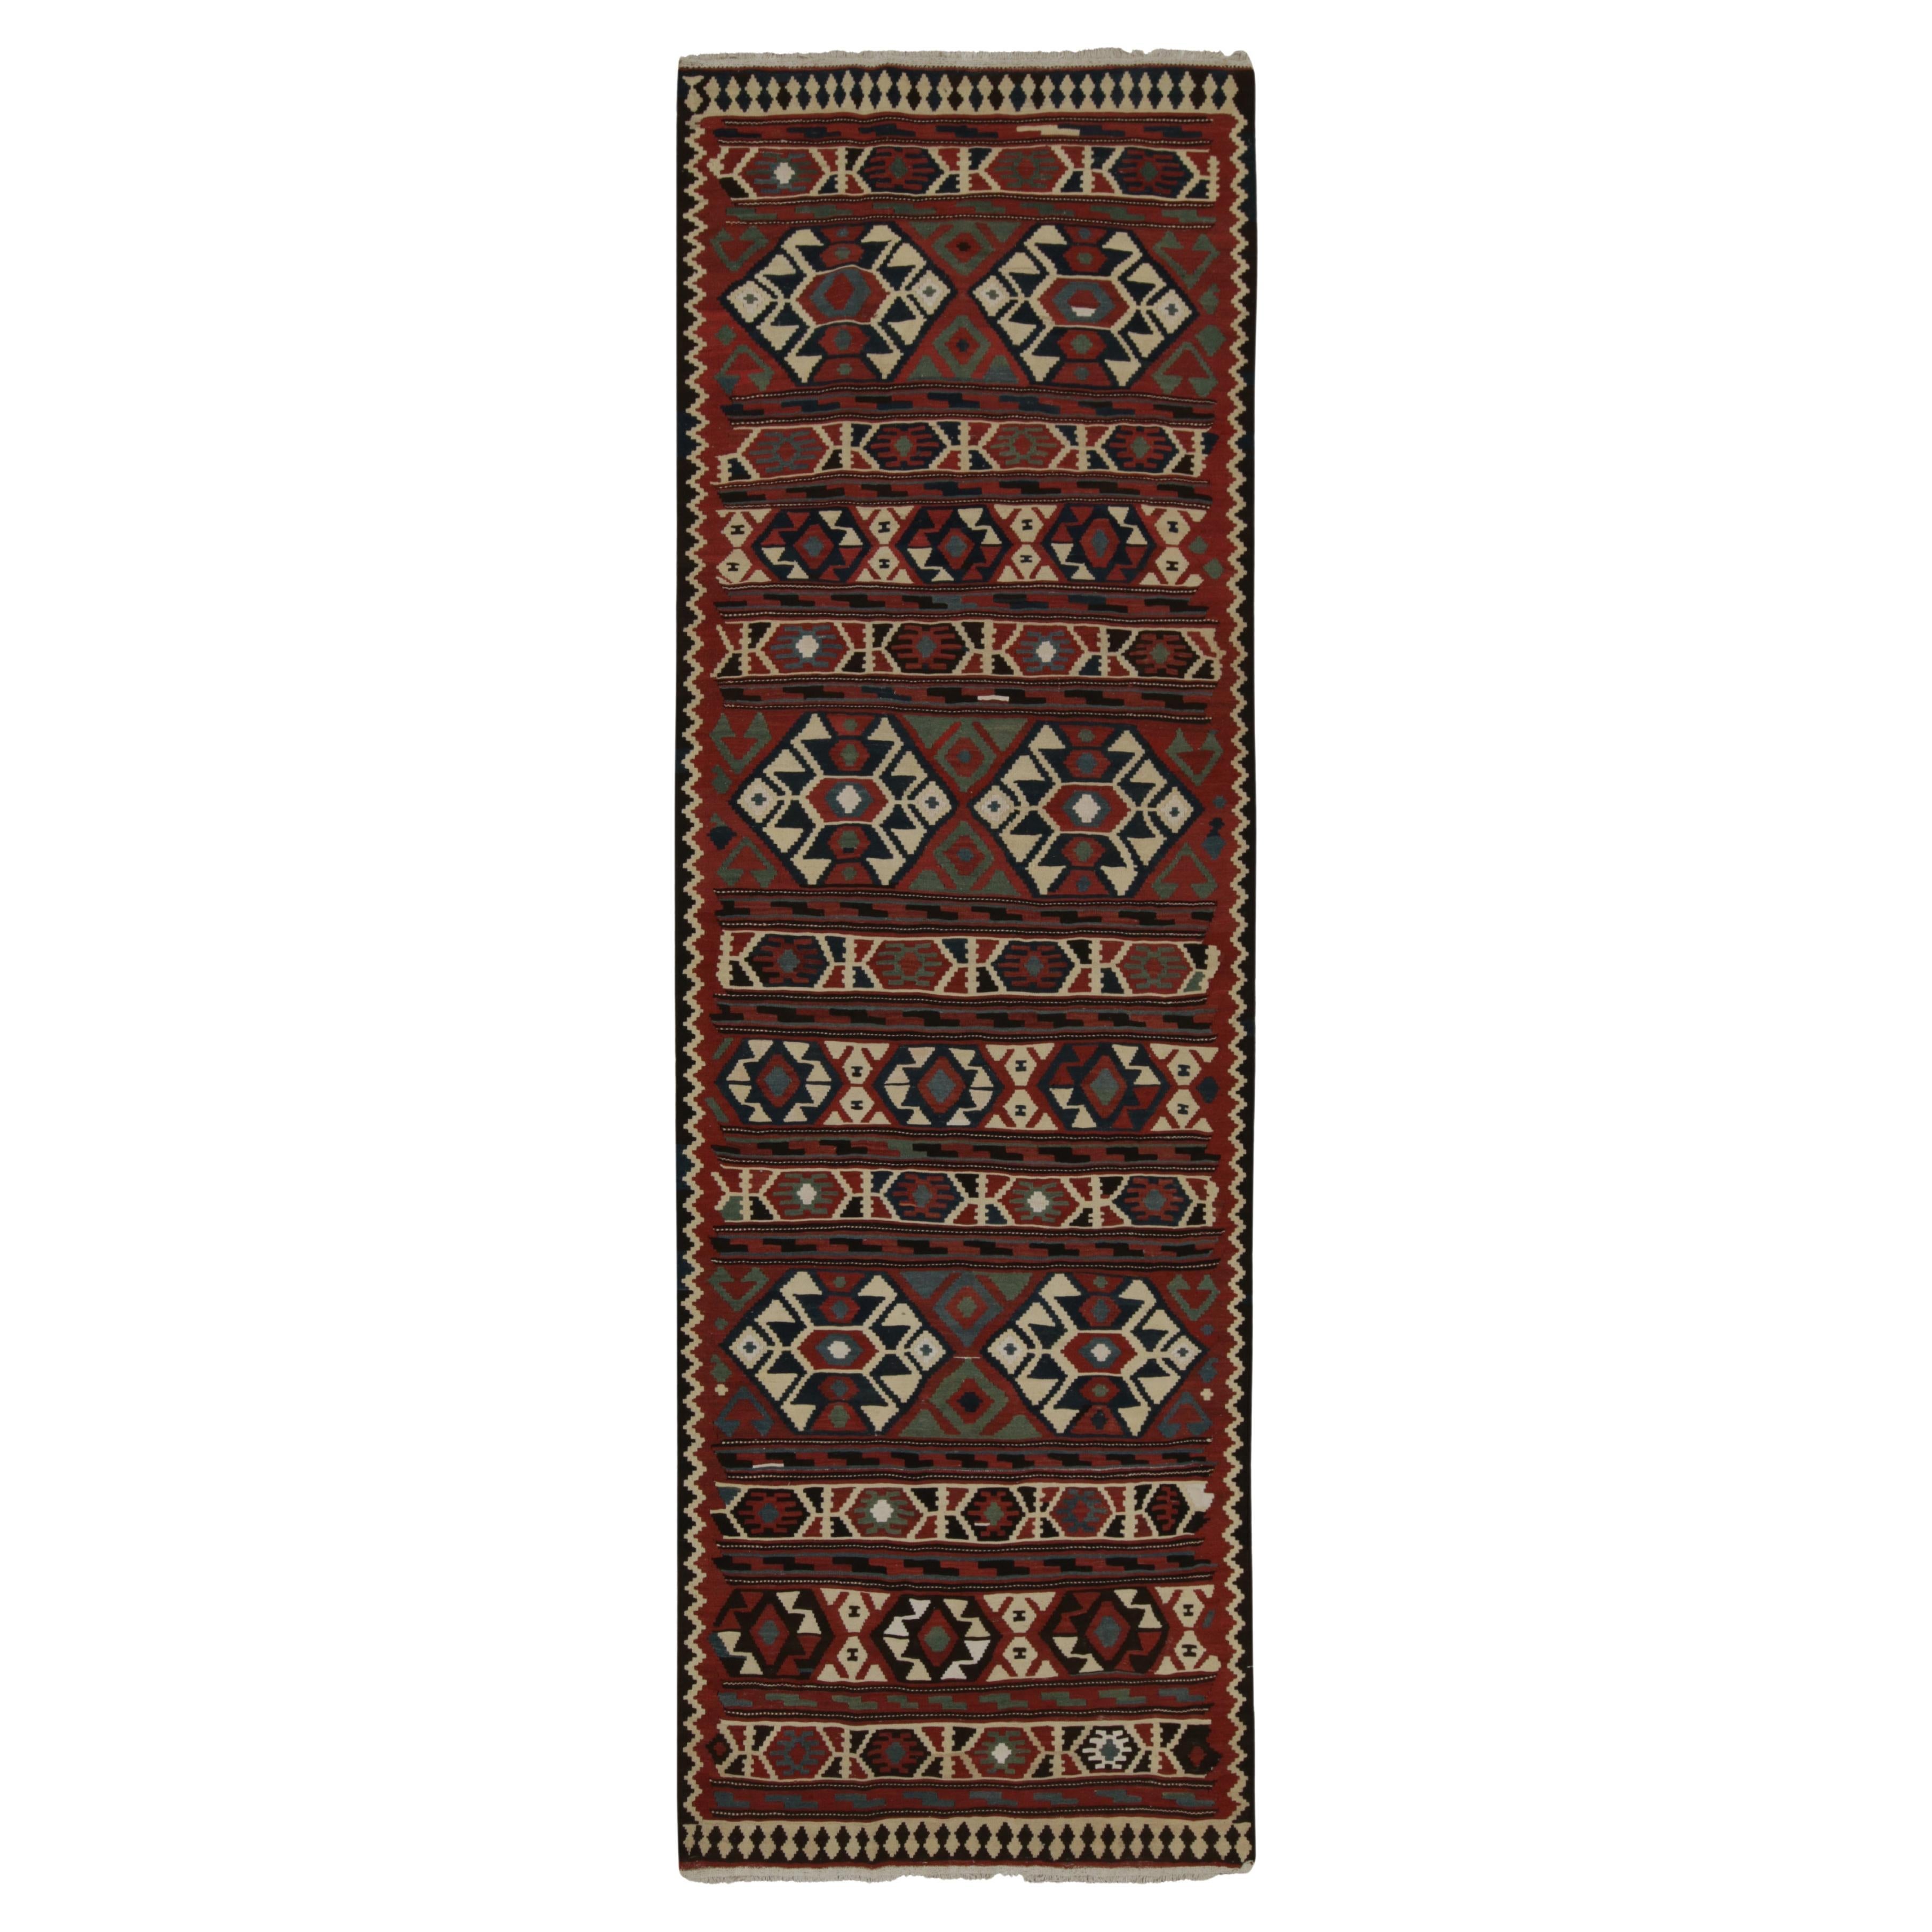 Extra-Long Vintage Persian Tribal Kilim with Geometric Patterns - by Rug & Kilim For Sale